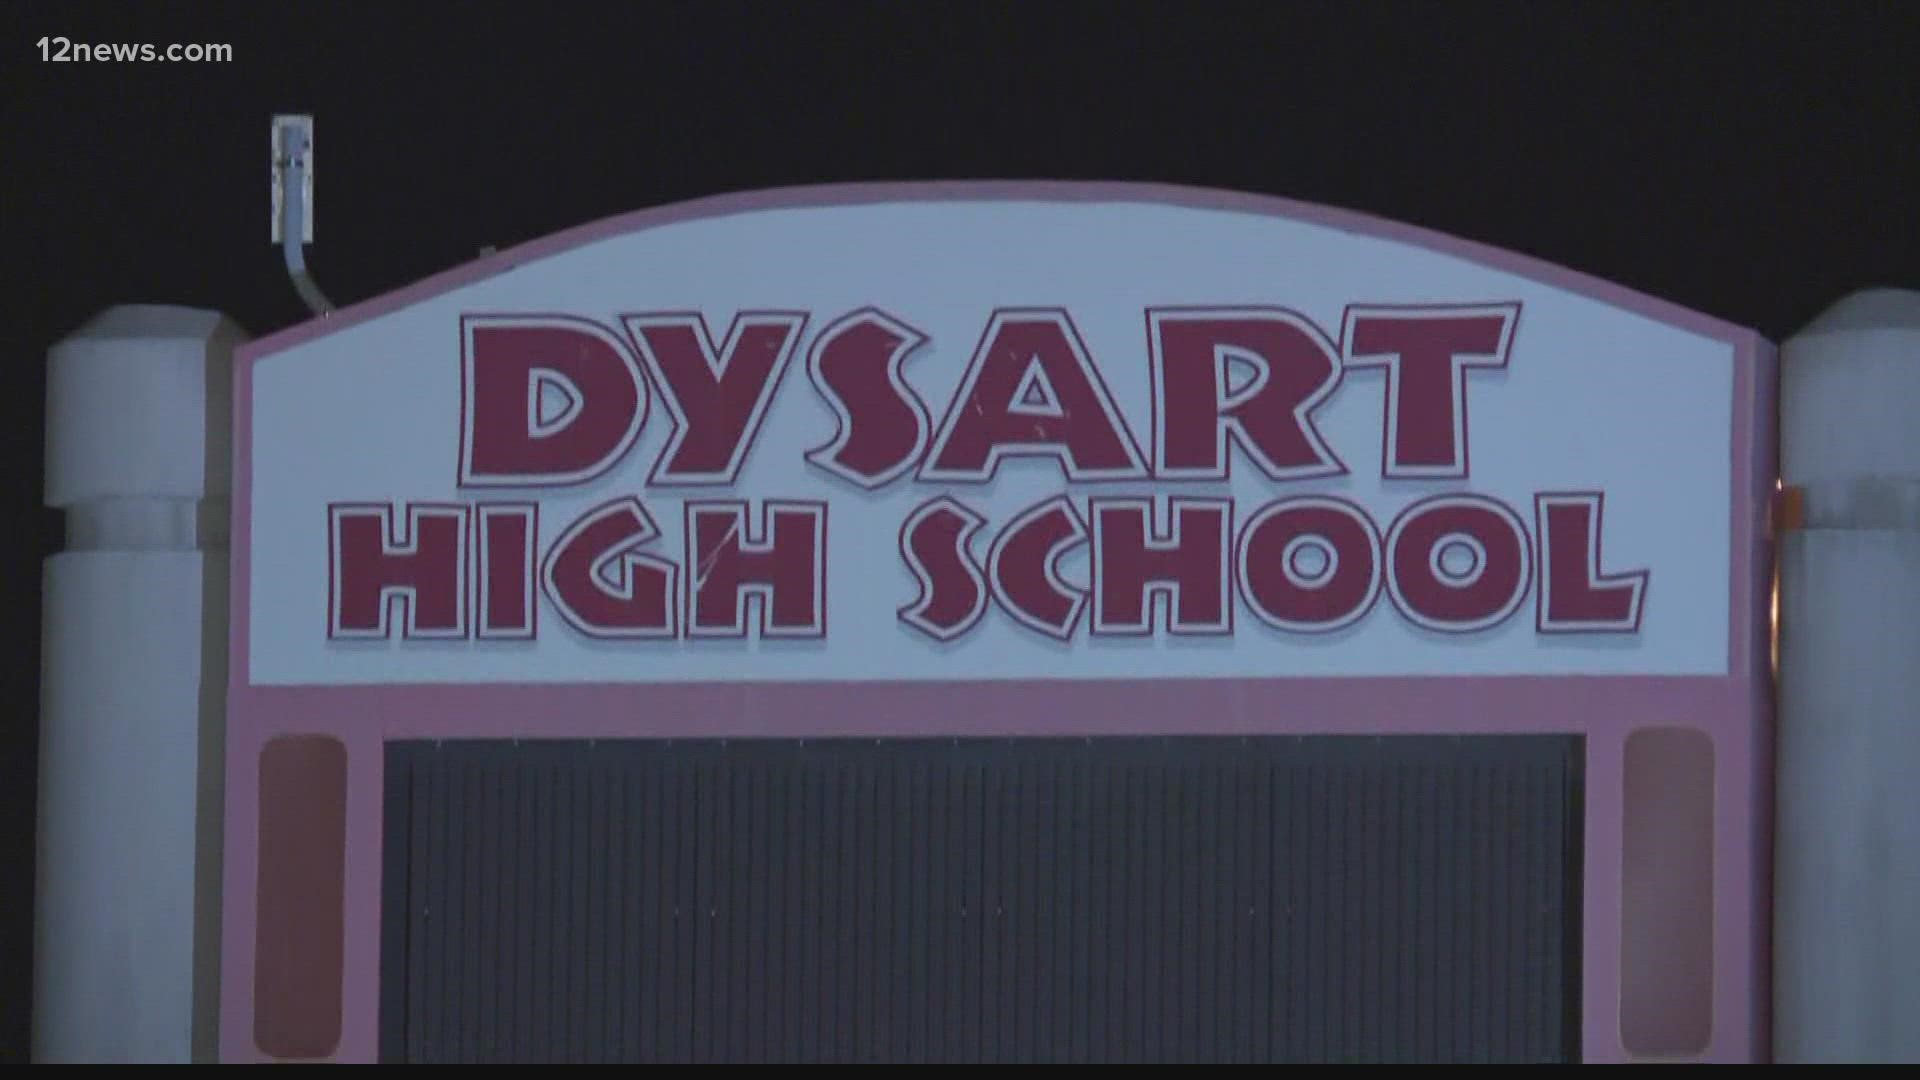 A Dysart High School security guard and assistant football coach was arrested Tuesday on suspicion of engaging in sexual misconduct with a 16-year-old student.